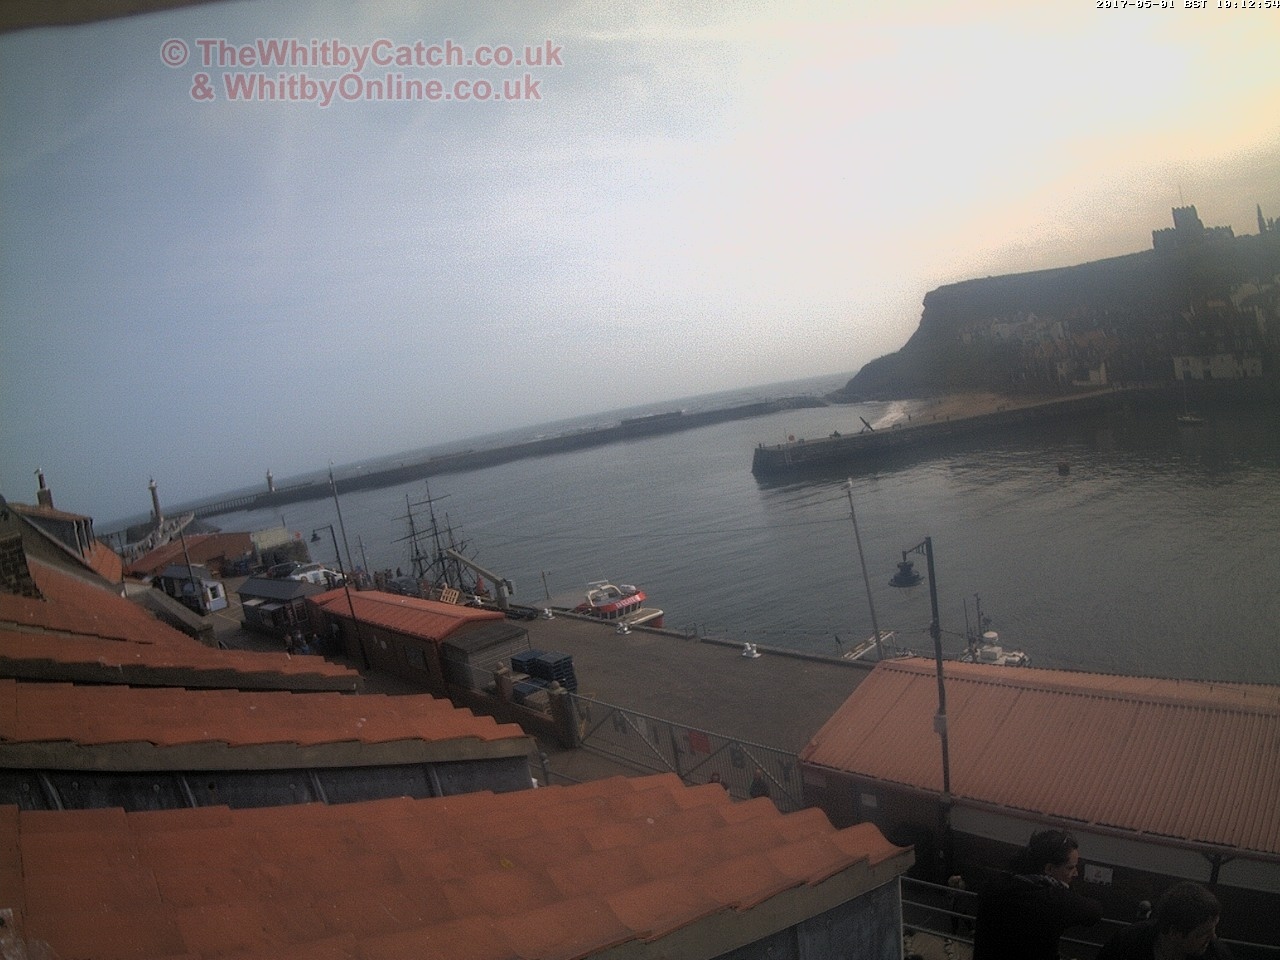 Whitby Mon 1st May 2017 10:13.